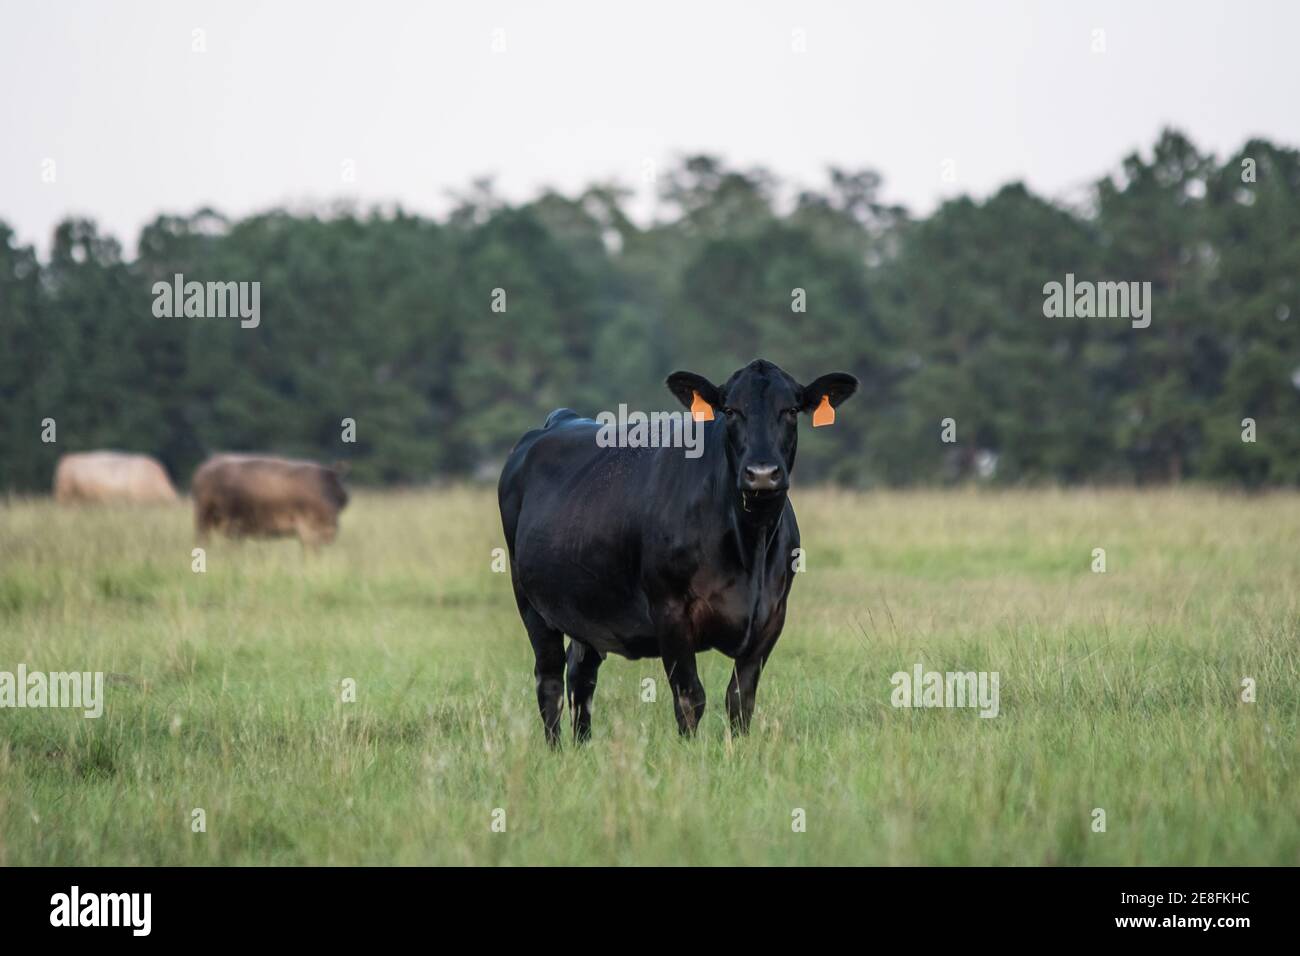 Black Angus cow looking at the camera standing in the foreground, with other cows grazing in the background out of focus. Room for copy to the right a Stock Photo